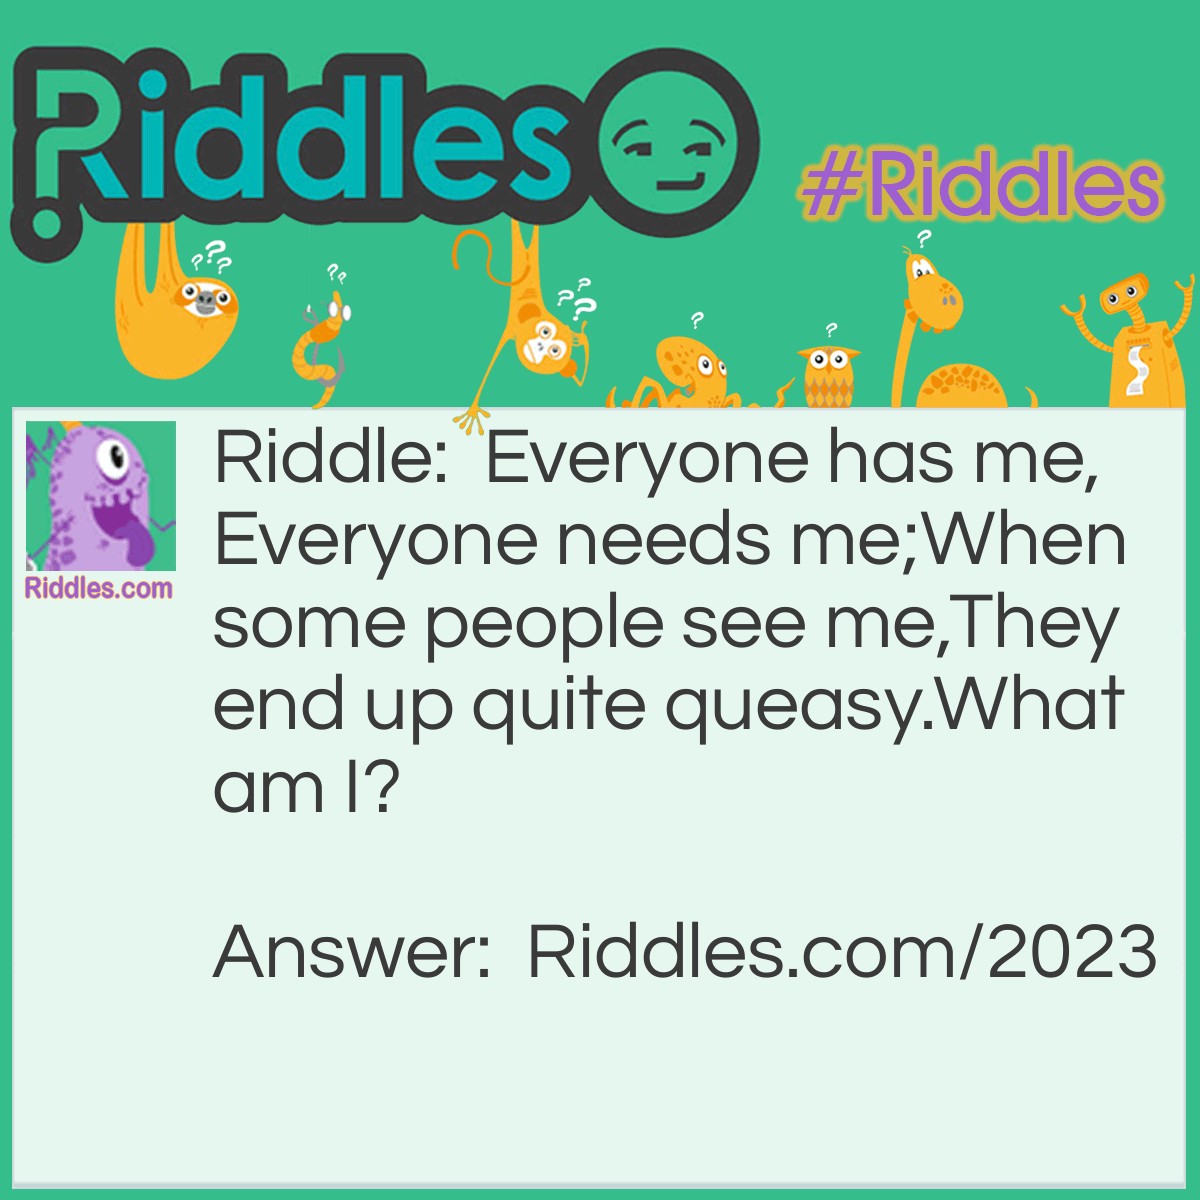 Riddle: Everyone has me,
Everyone needs me;
When some people see me,
They end up quite queasy.
What am I? Answer: Blood